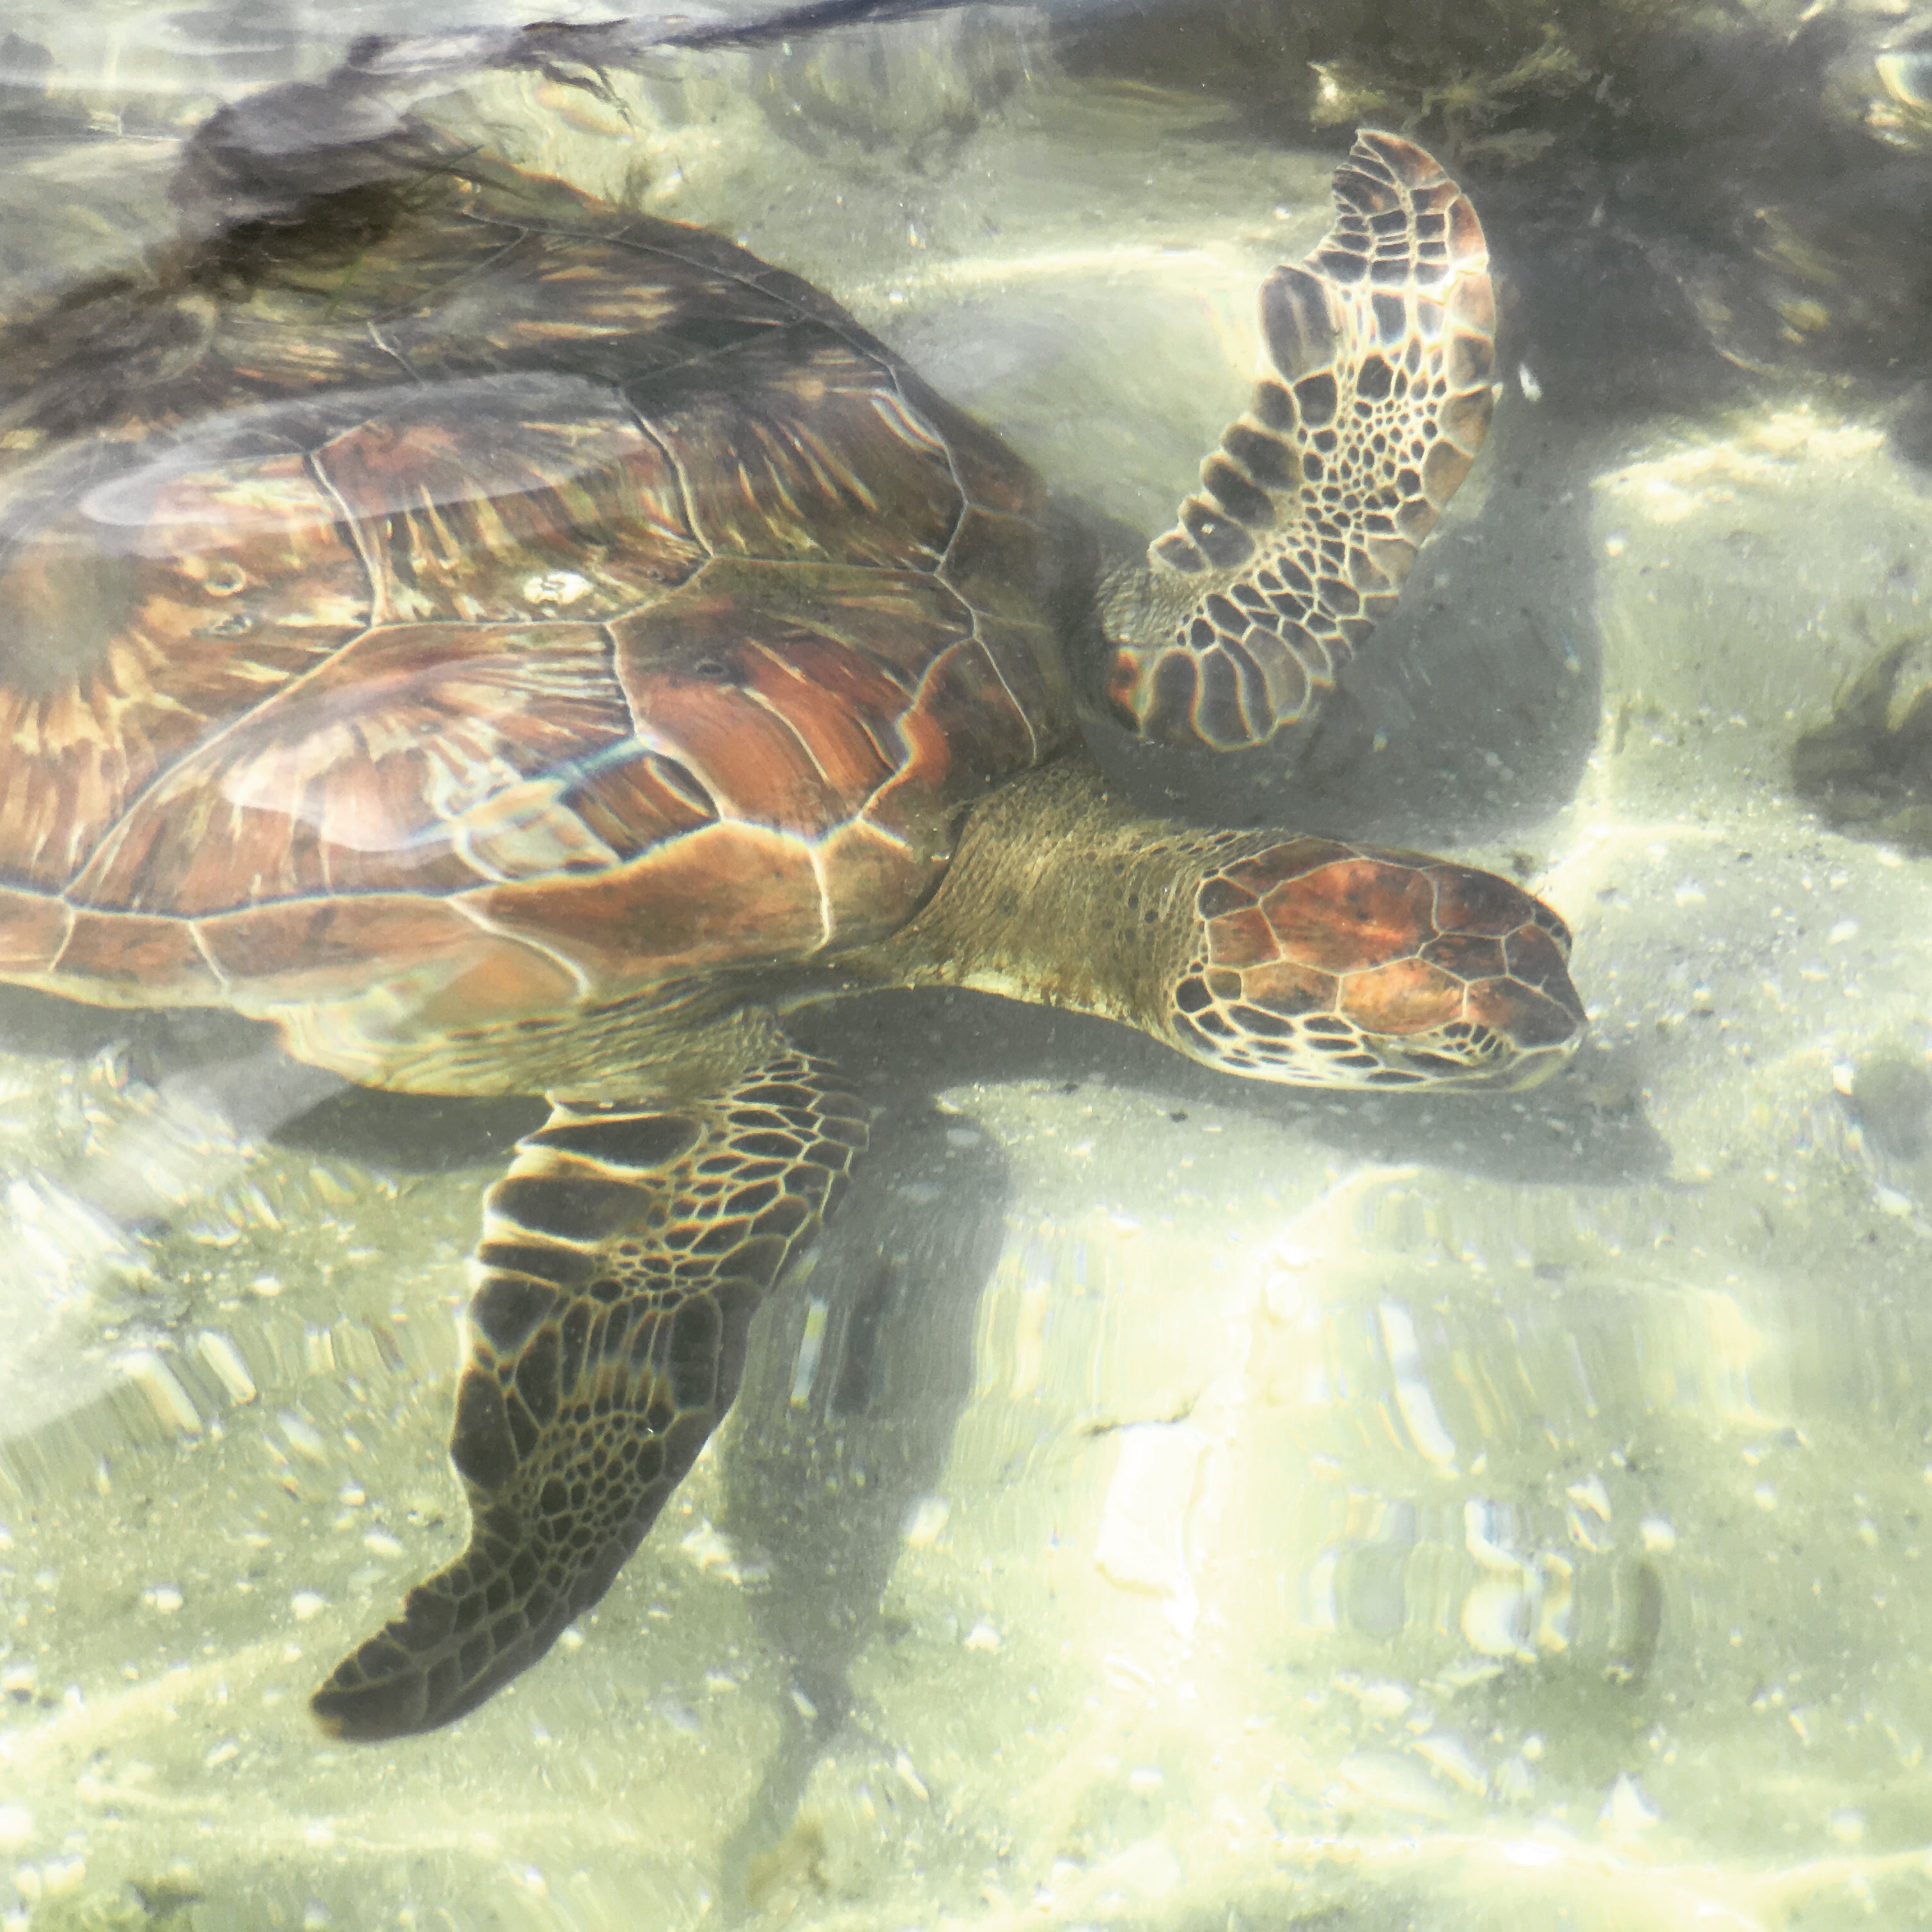 Sea Turtles at Cayo Costa | Florida State Parks